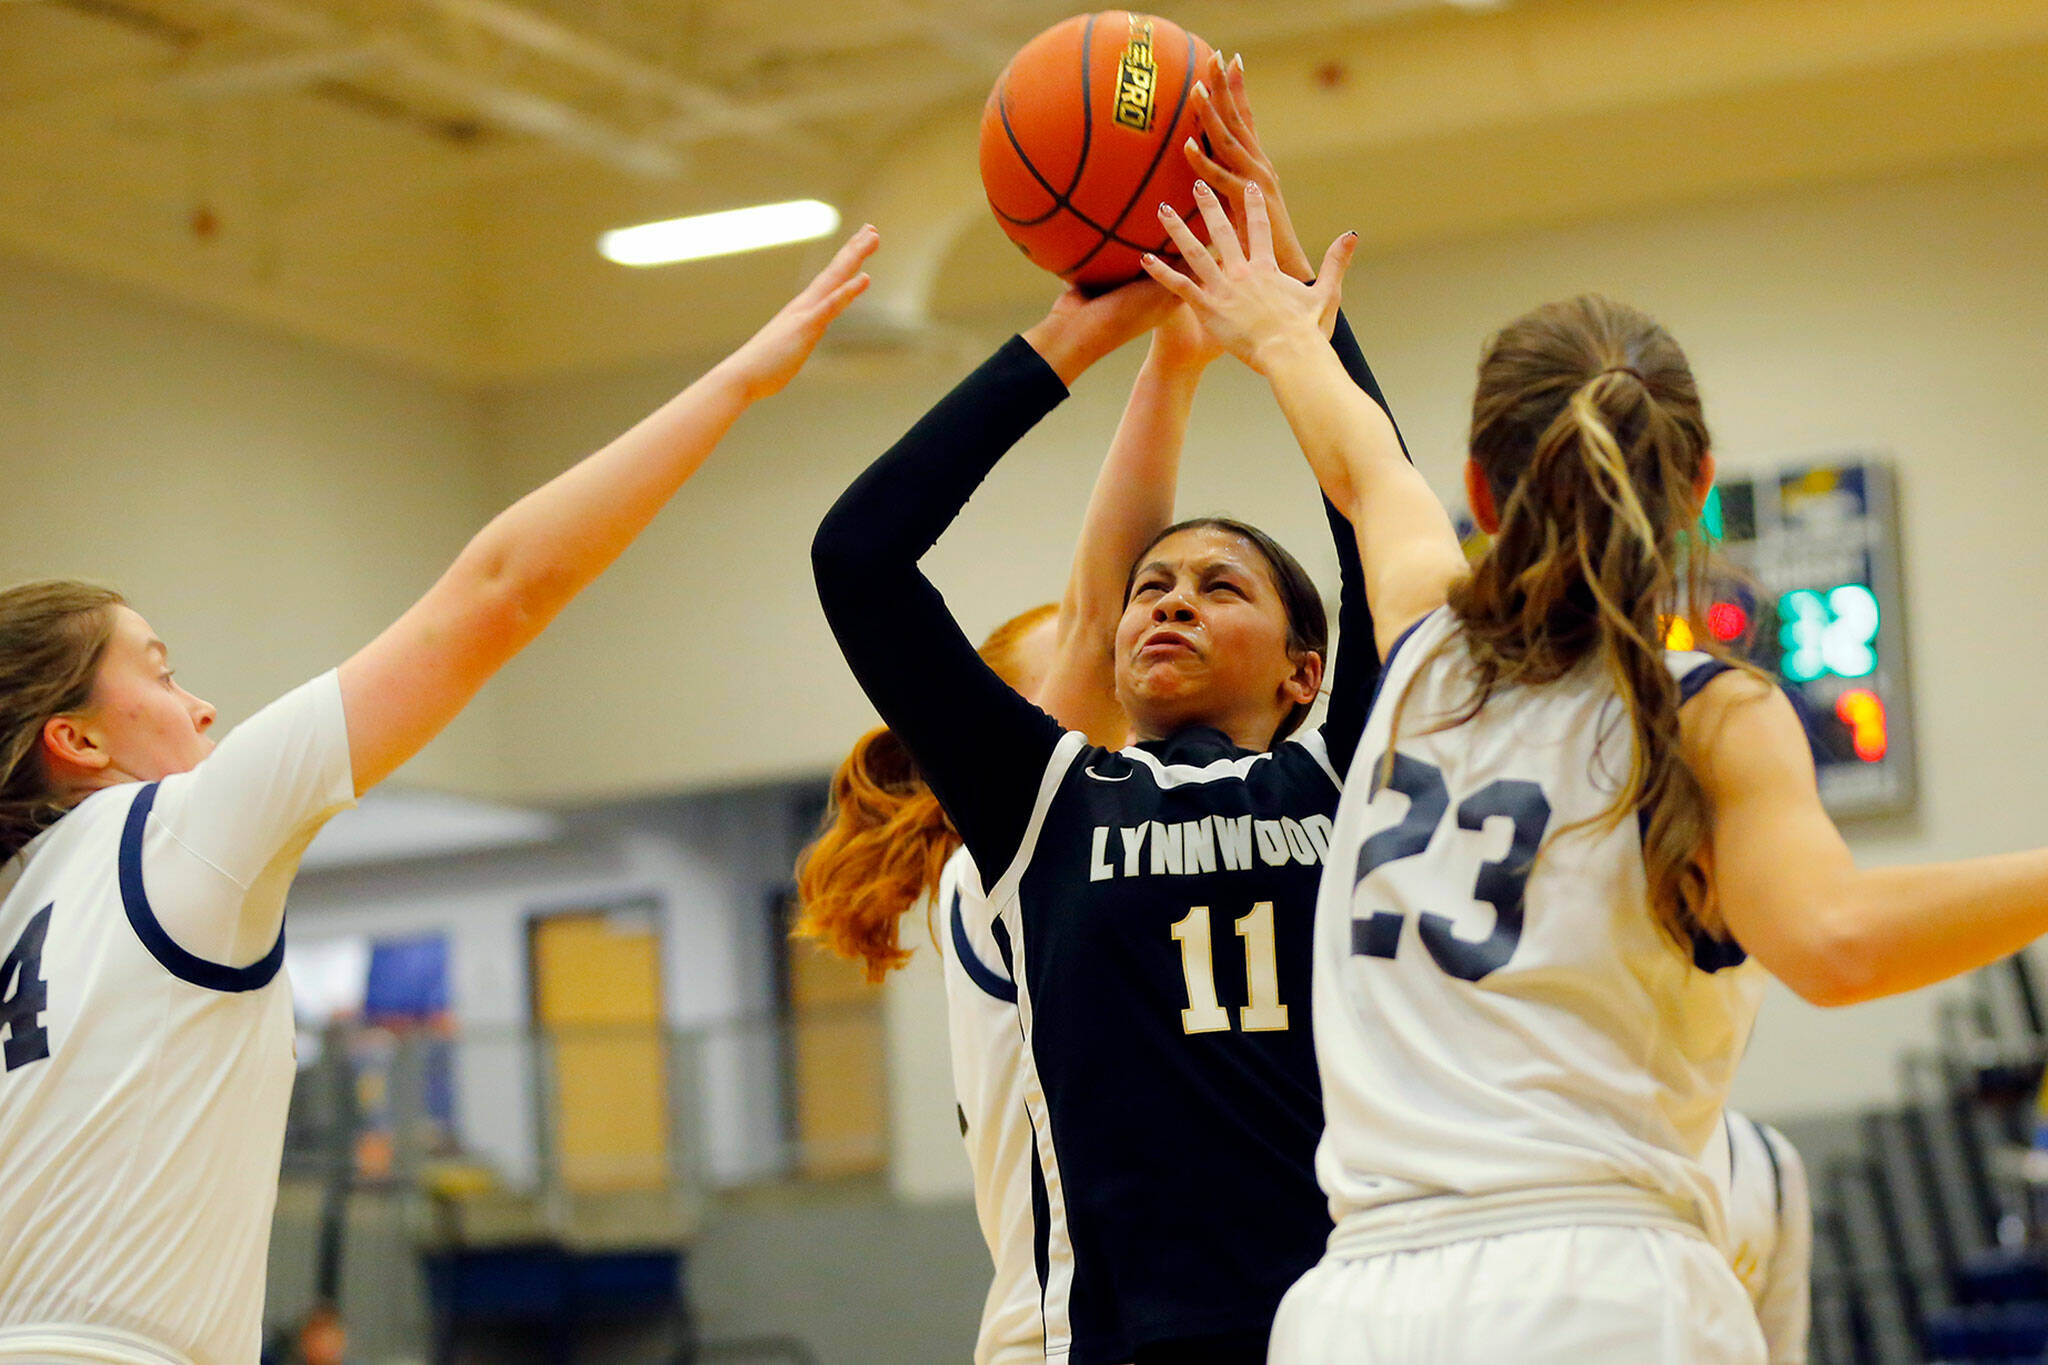 Lynnwood’s Teyah Clark gets off a shot against Everett on Dec. 15, 2022, in Everett. Lynnwood is ranked 10th in Class 3A. (Ryan Berry / The Herald)